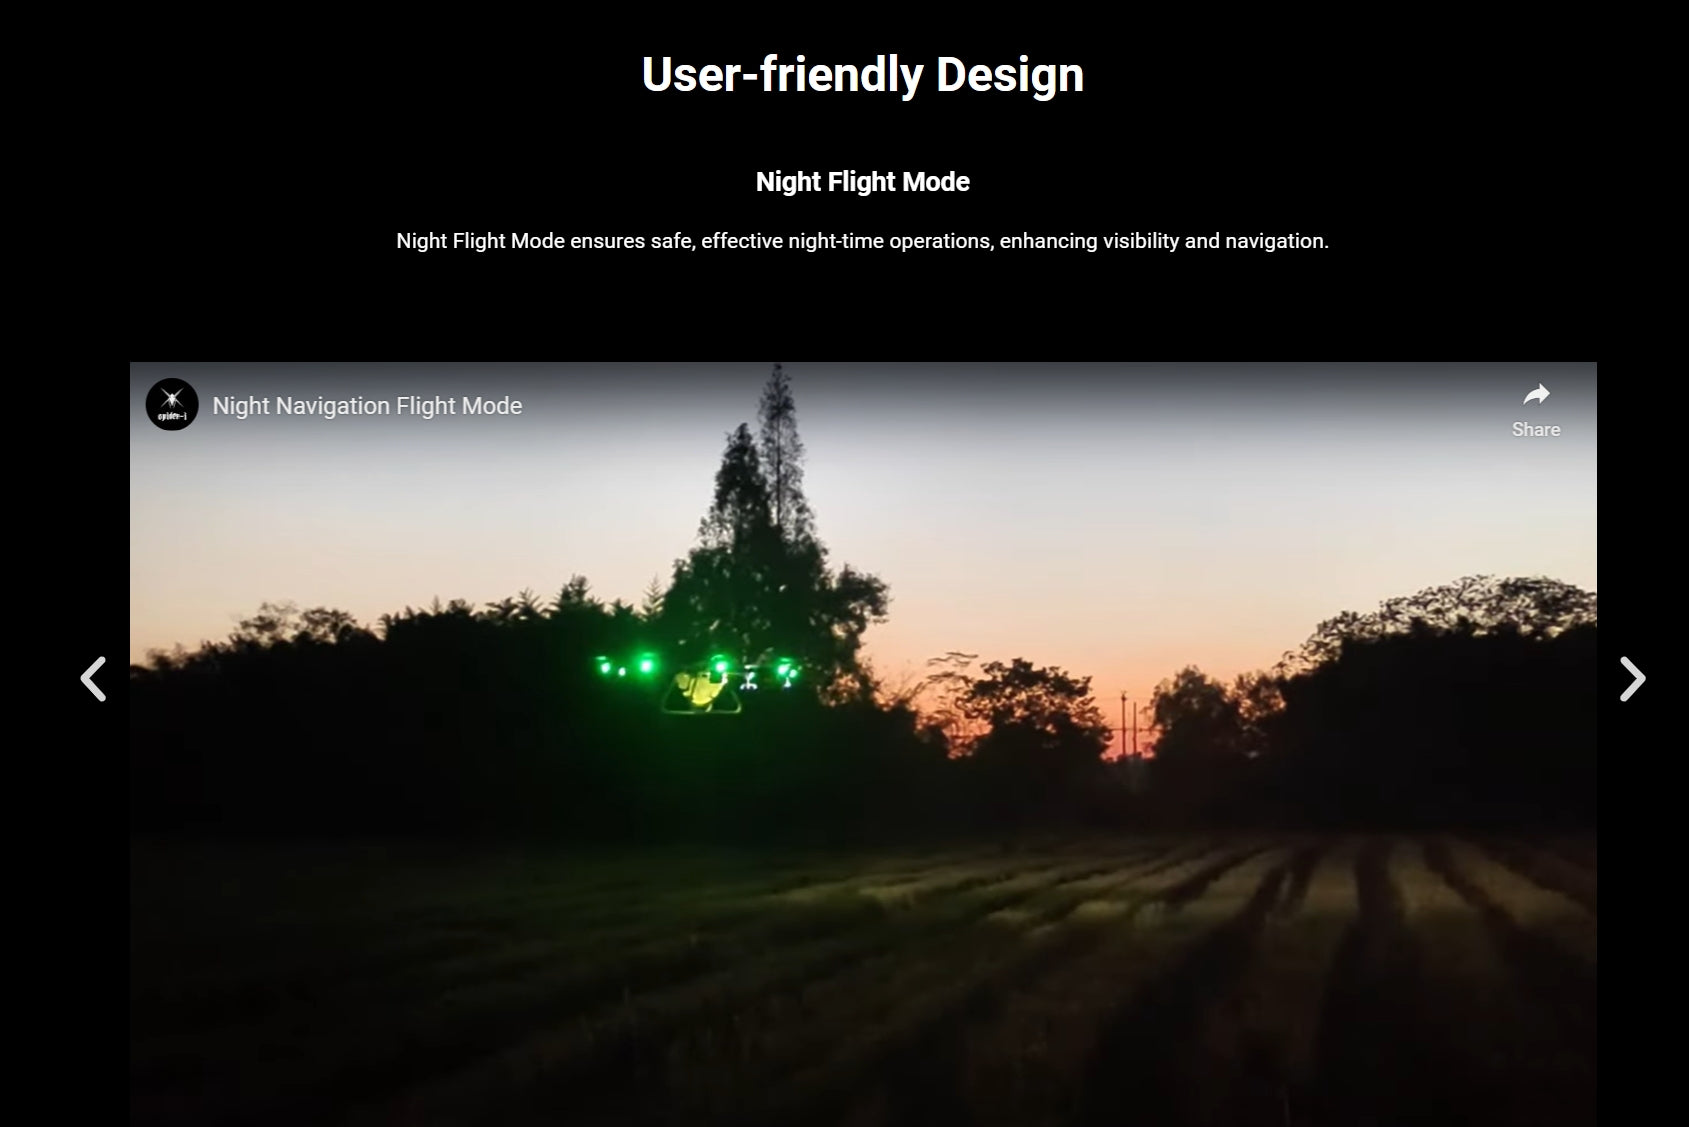 H120 Agriculture Drone, Night Flight Mode ensures safe; effective night-time operations, enhancing visibility and navigation: